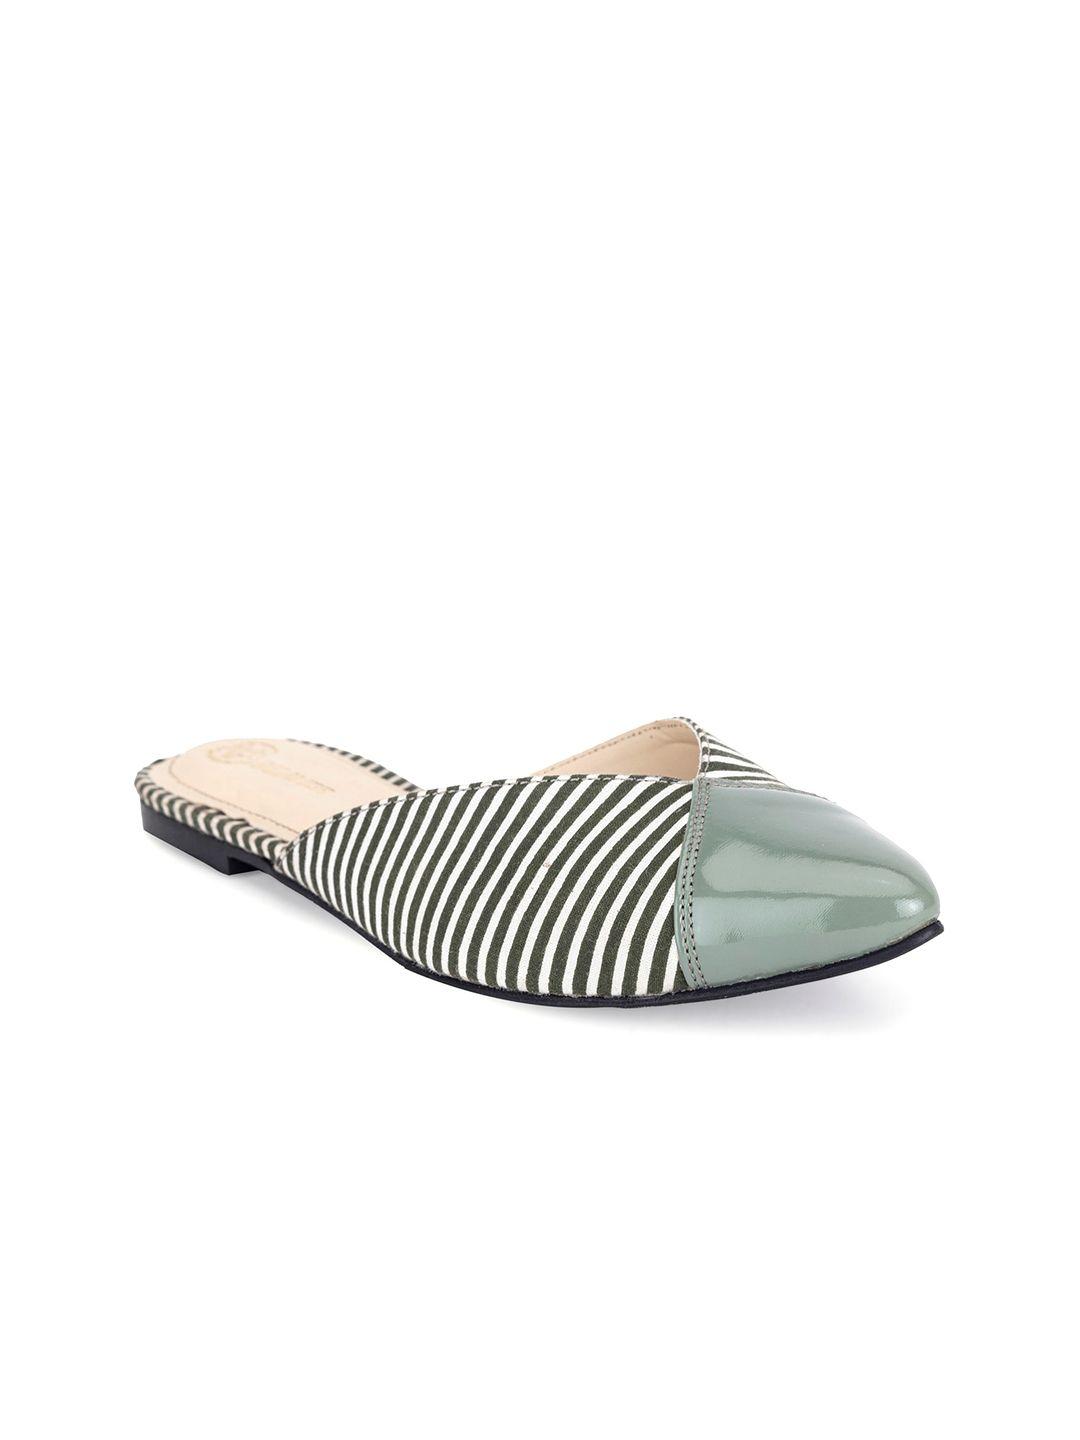 beaver pointed toe printed mules